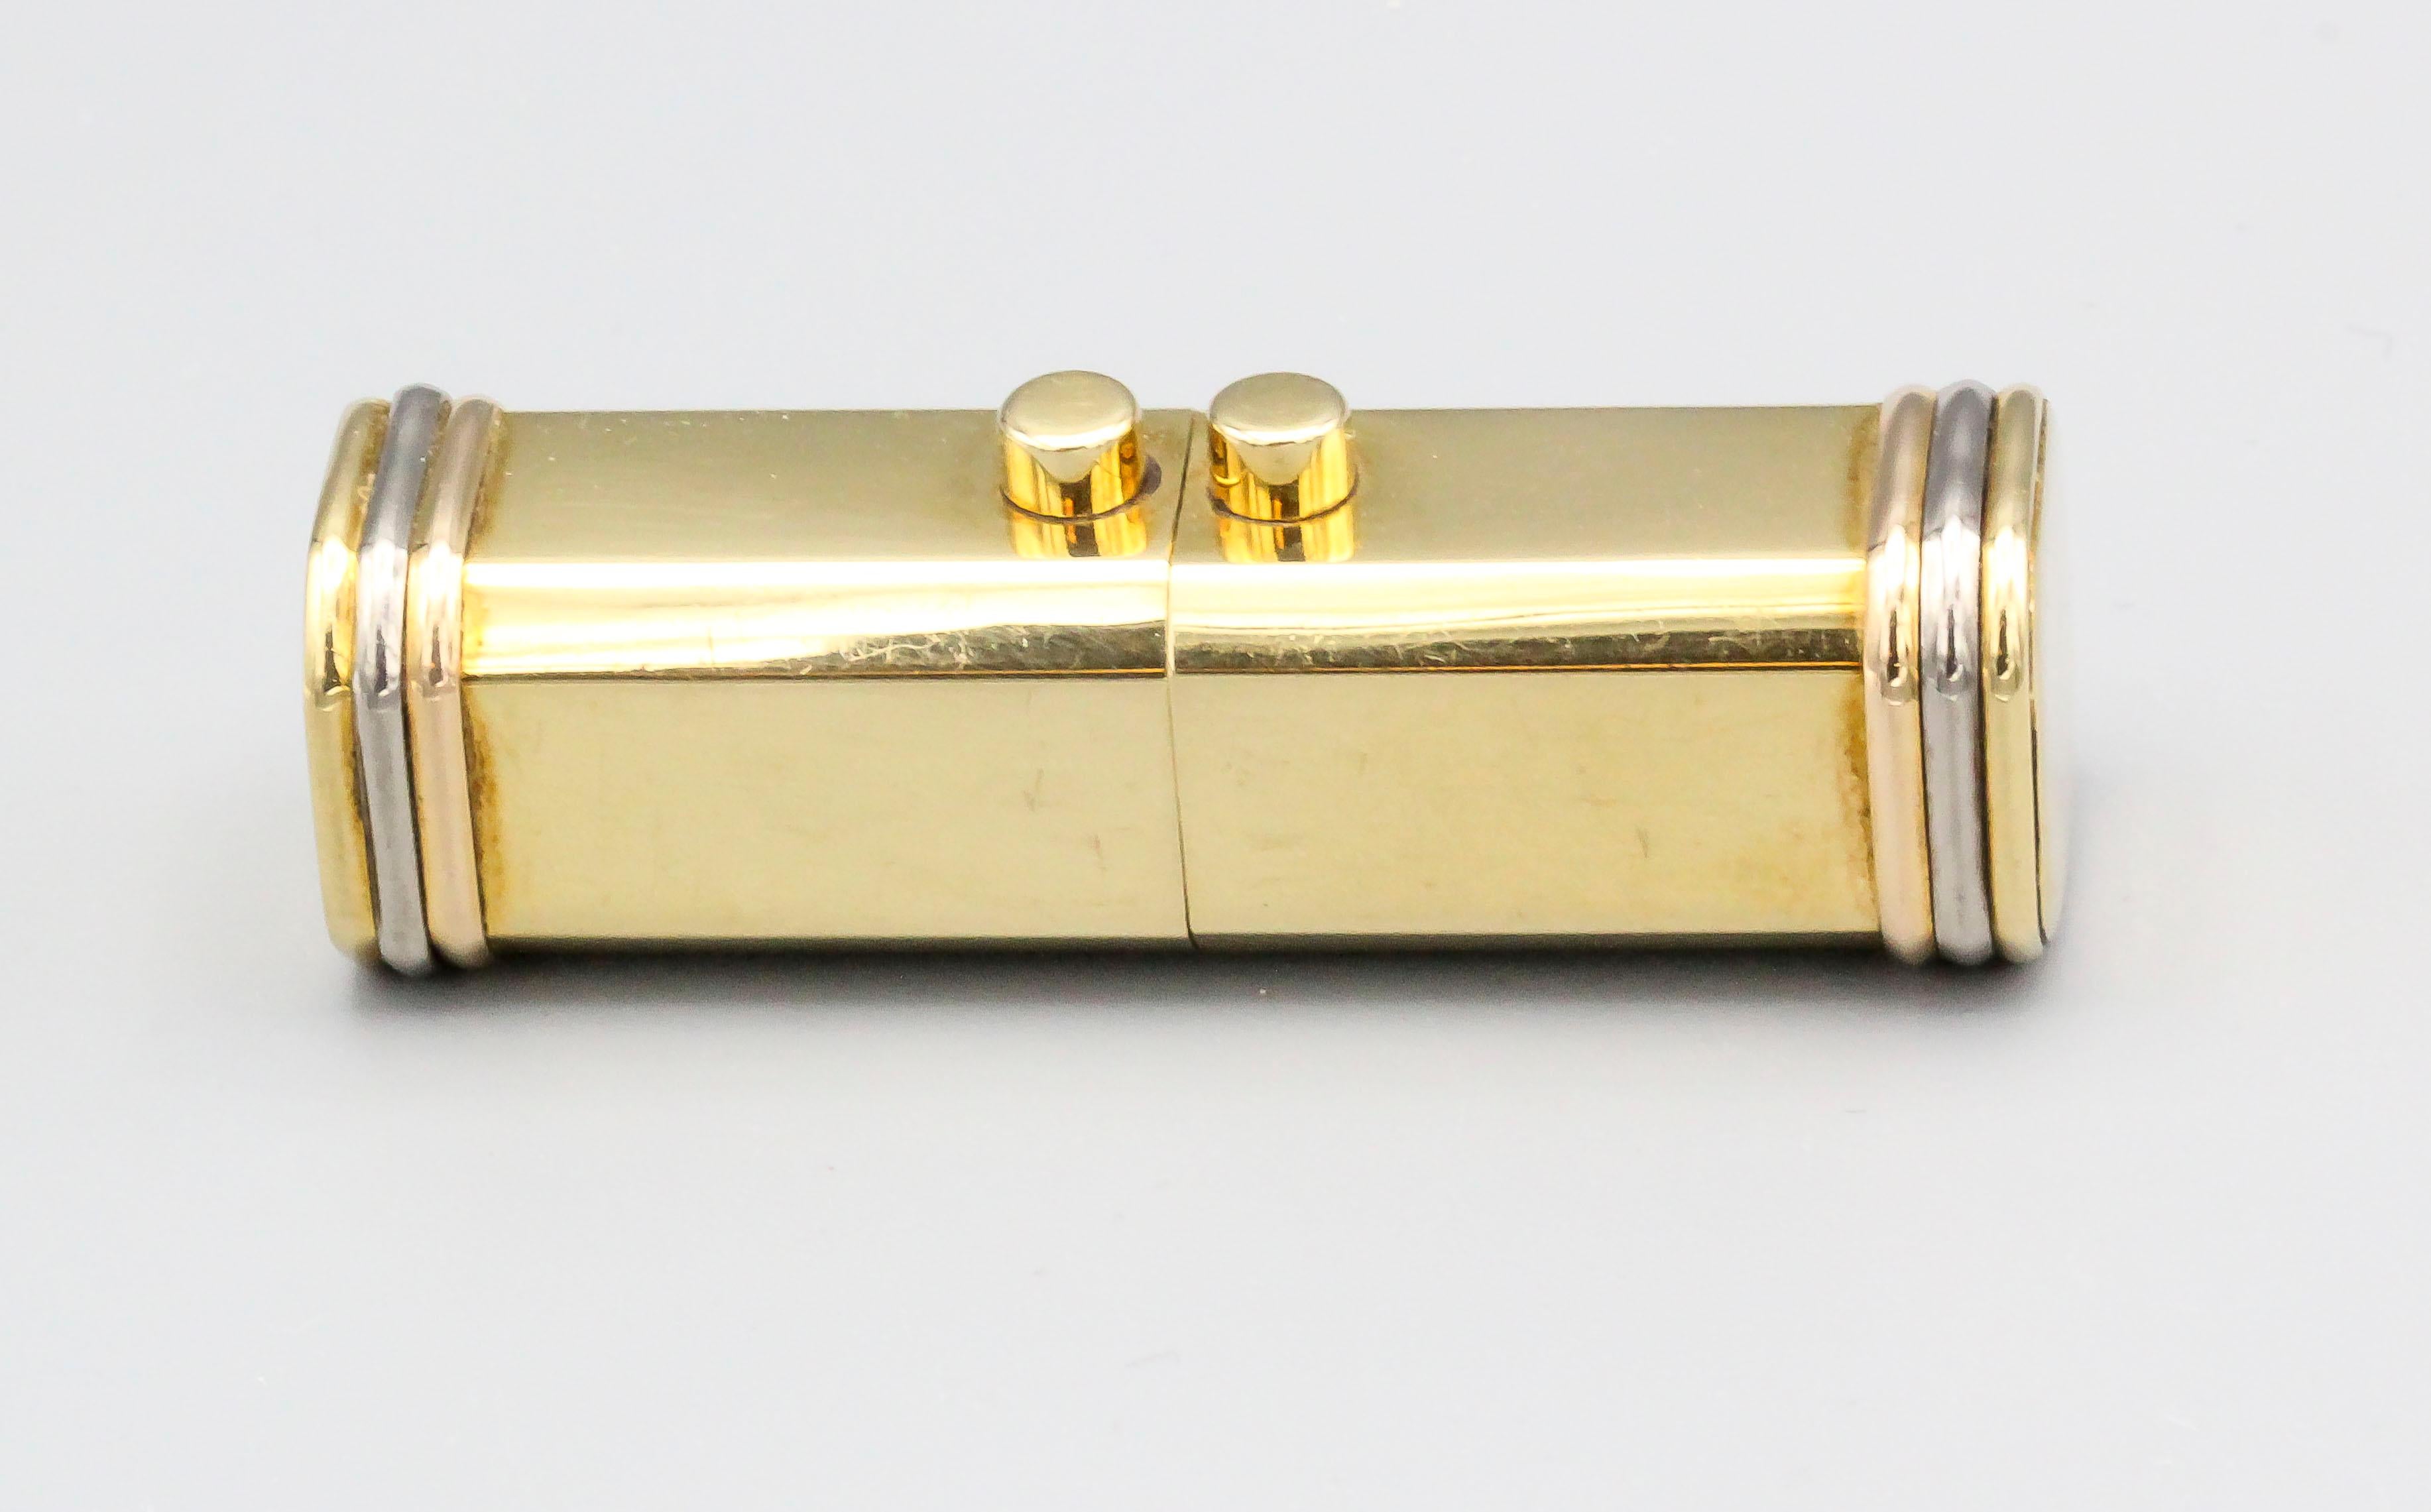 Elegant 18k yellow gold rectangular pillbox with sliding mechanism, by Cartier. It features a tri-color gold ribbed design on the sides, akin to the Trinity collection.  Well made and easy to use for larger pills.

Hallmarks: Cartier, 18K, reference